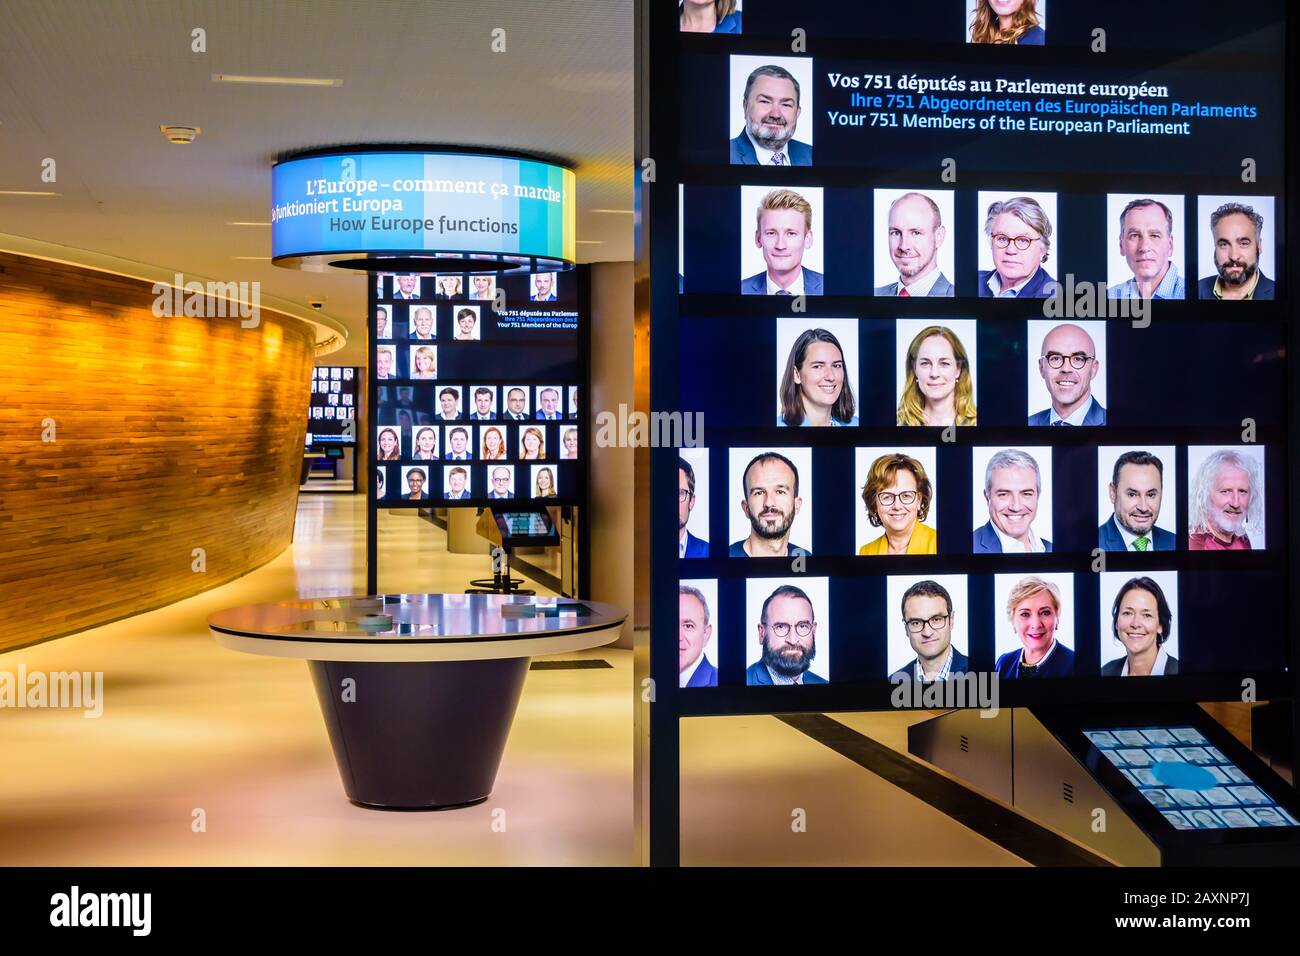 Portraits of the MEPs displayed in the Simone Veil parlamentarium, an interactive pedagogical space in the Louise Weiss building in Strasbourg, France Stock Photo